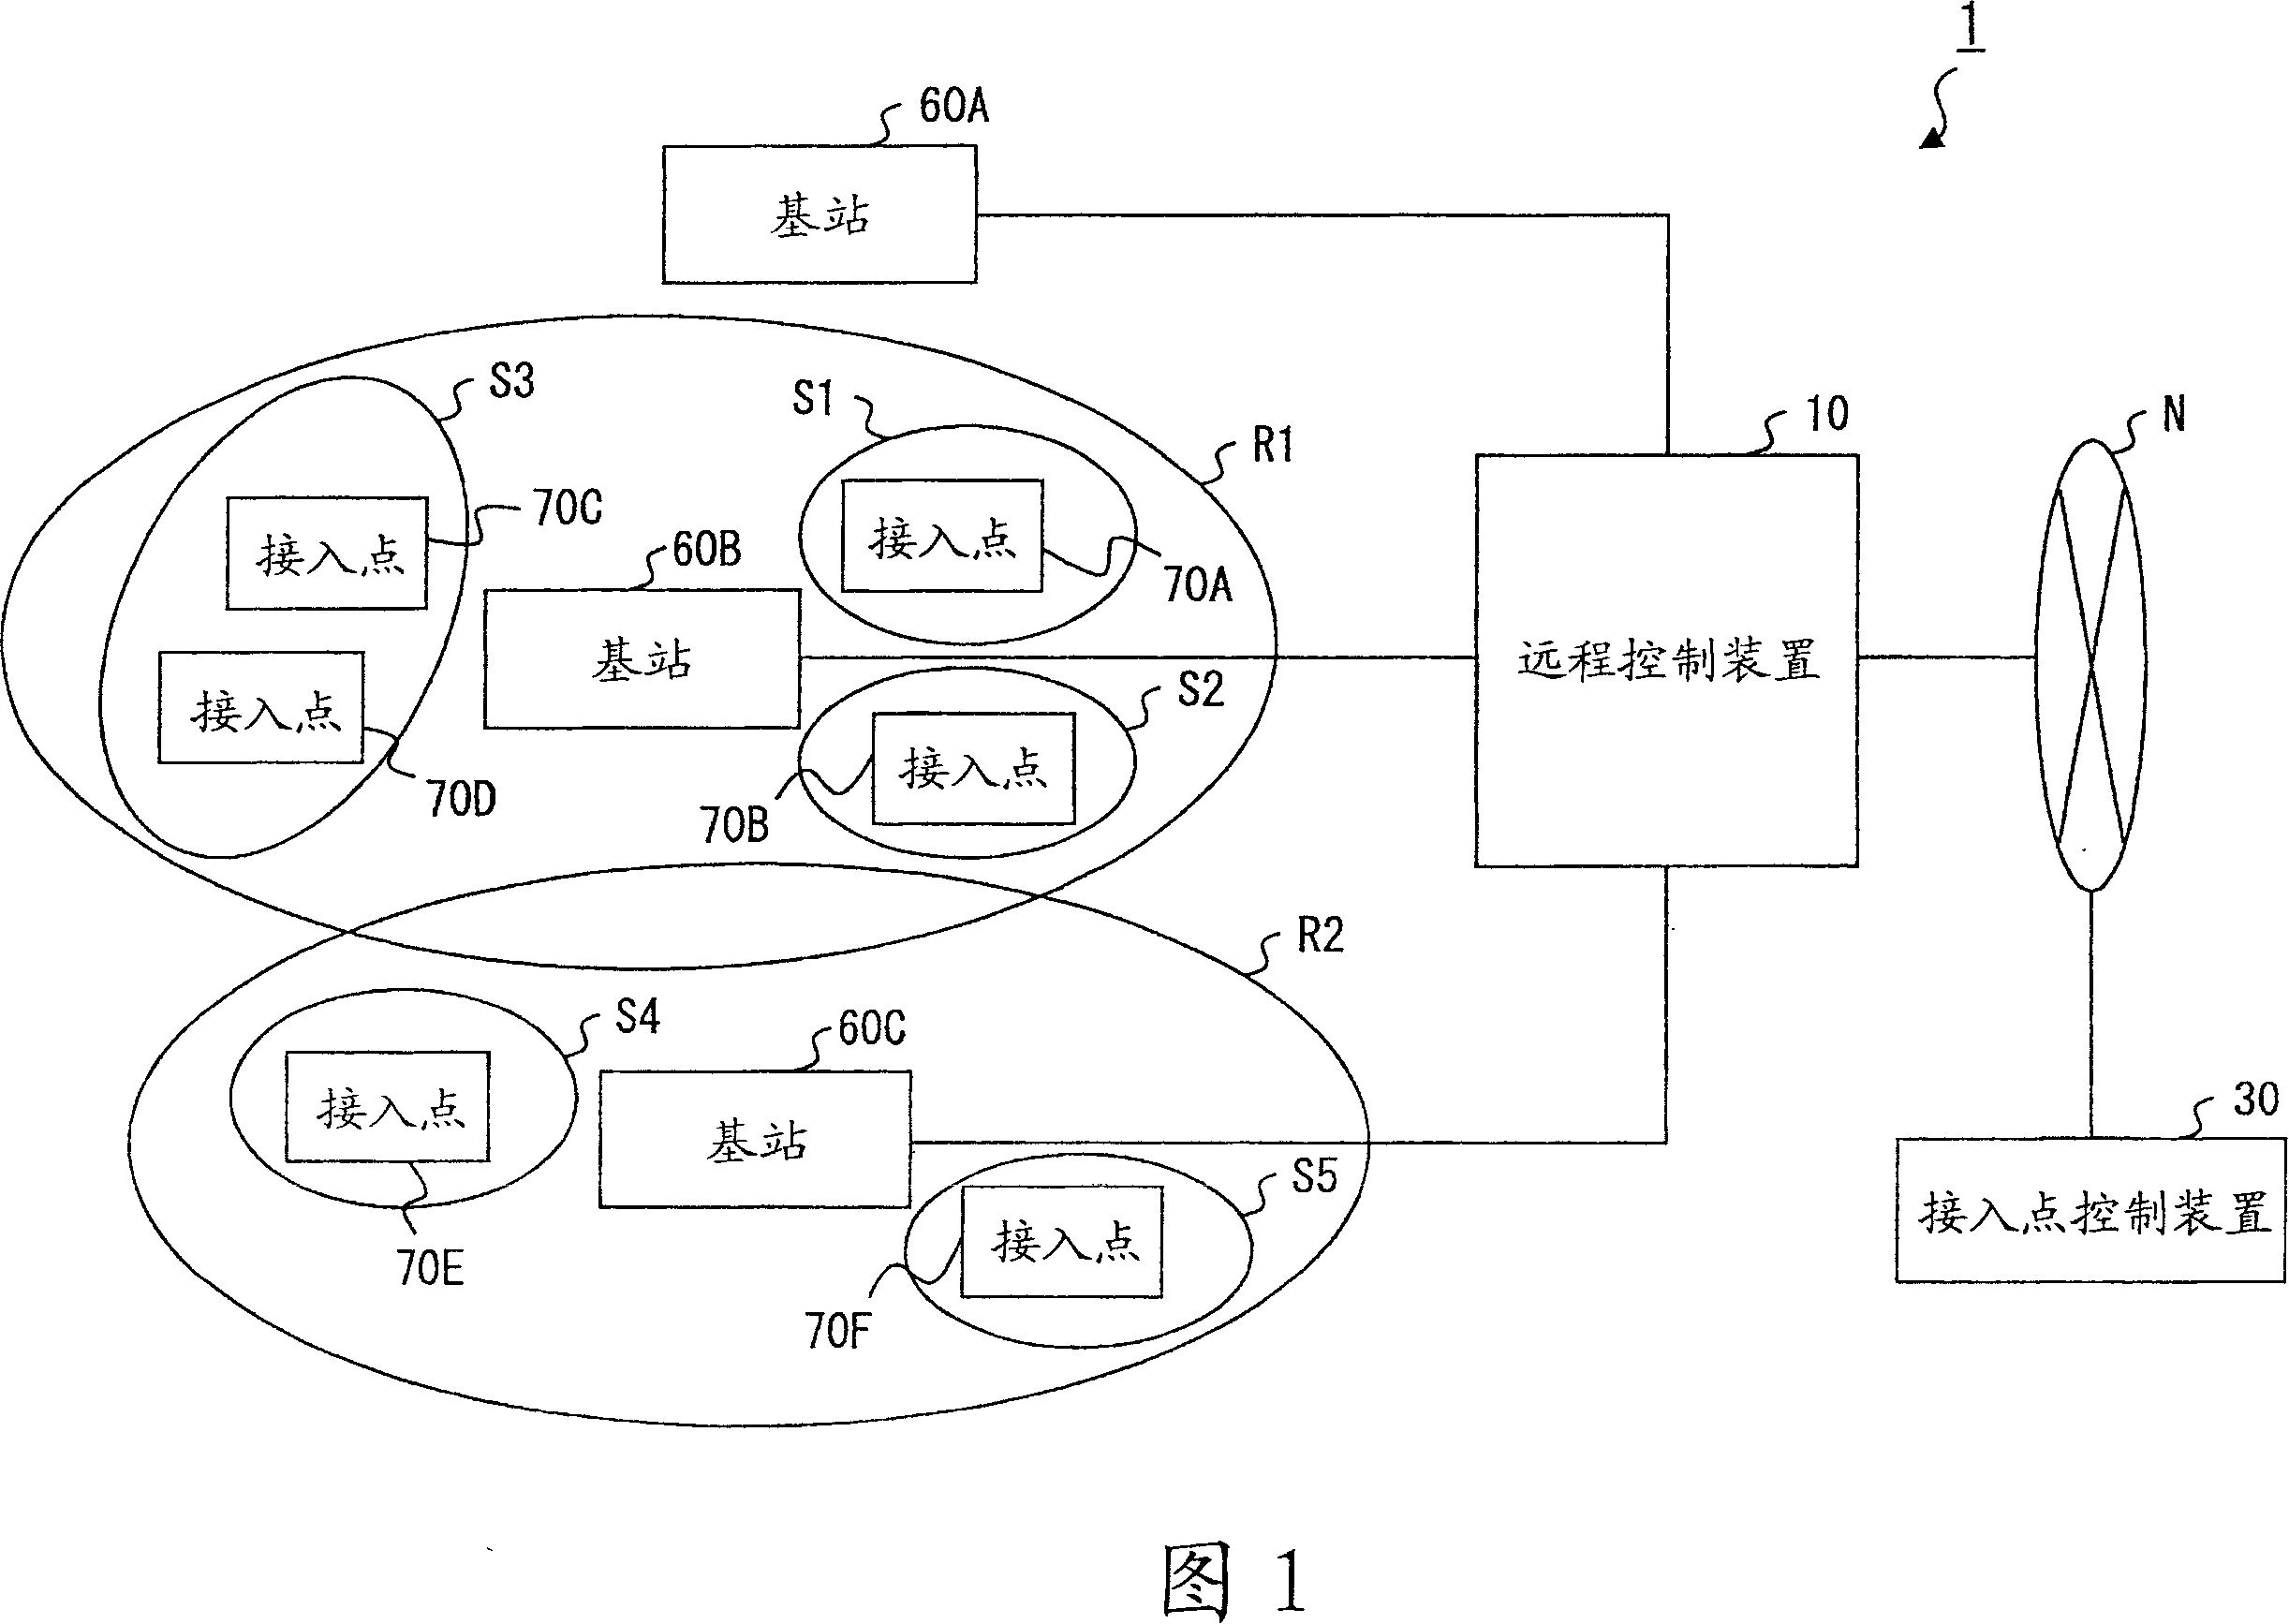 Remote control device, communication network system and remote control method